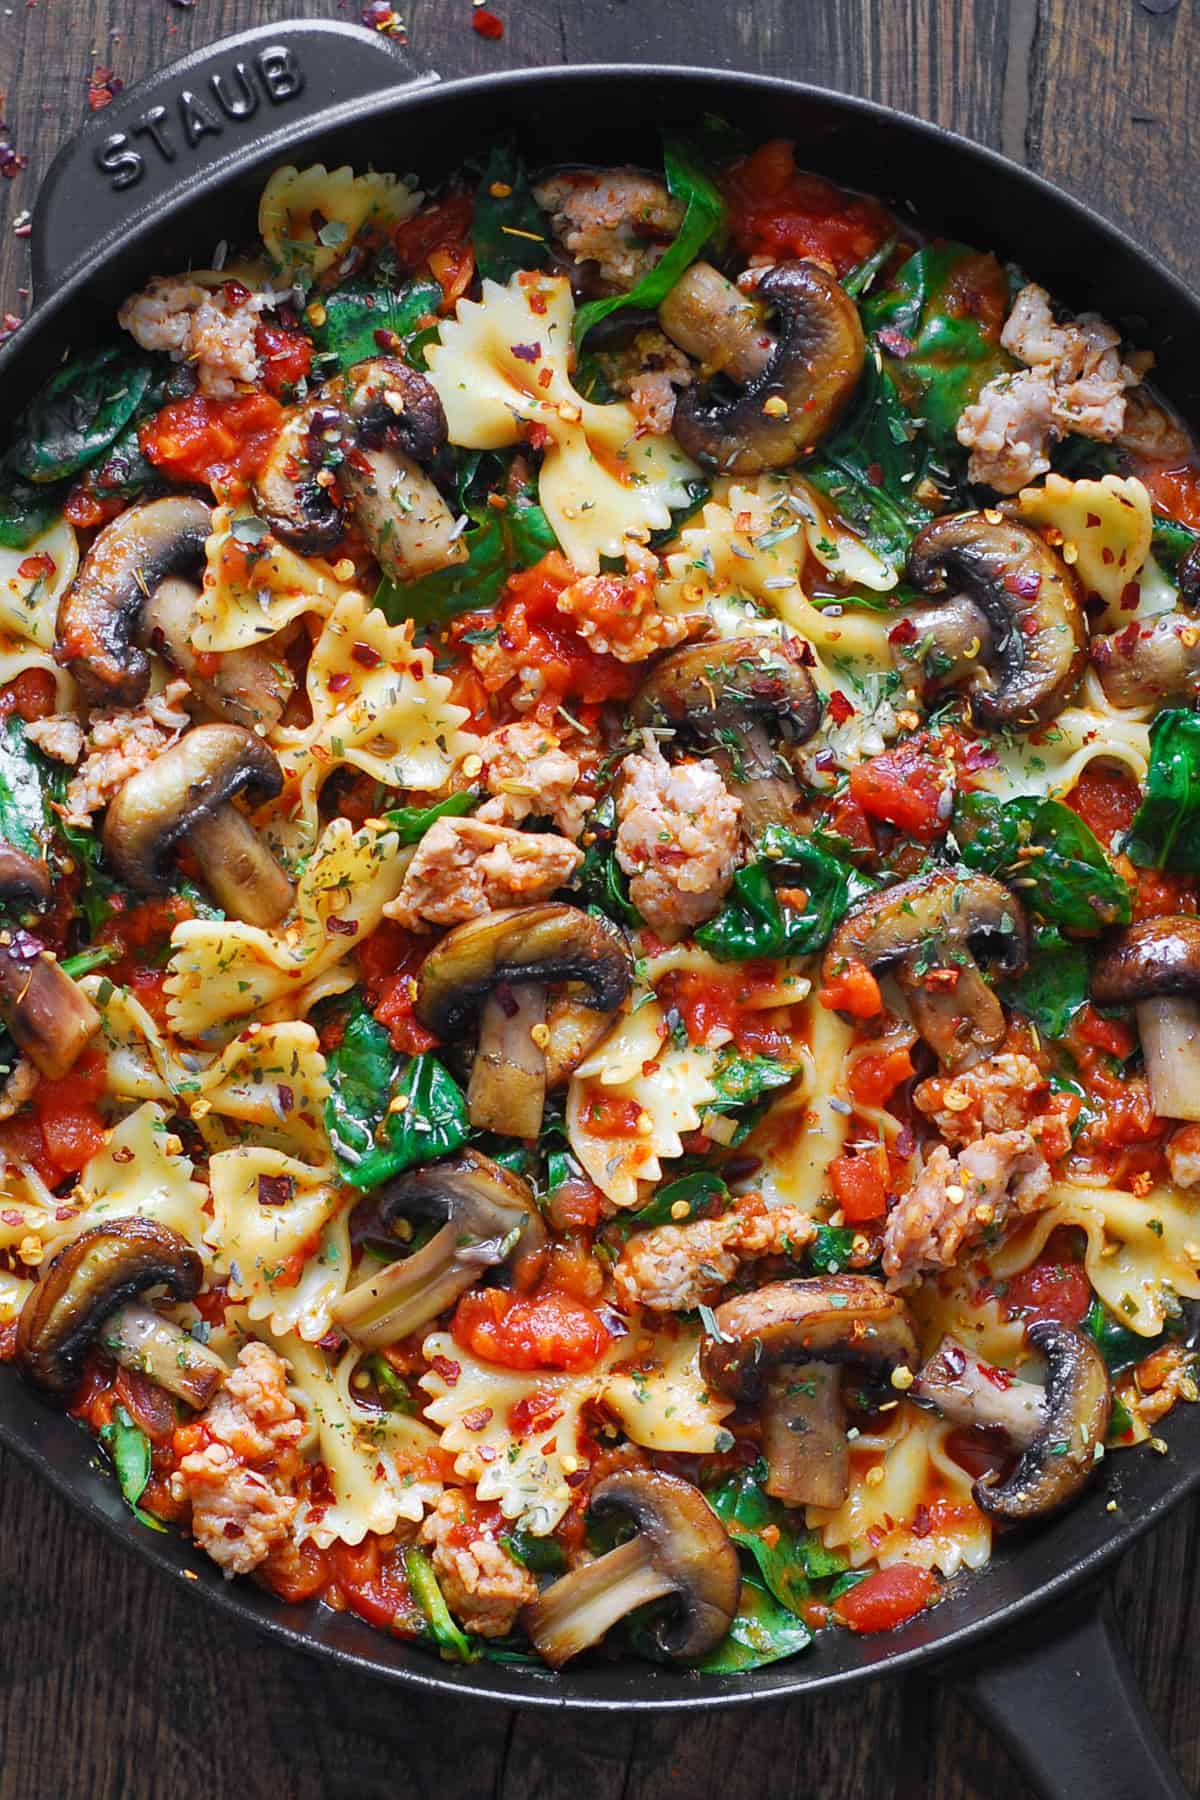 Italian sausage pasta with spinach, mushrooms, and tomato sauce in a cast iron pan